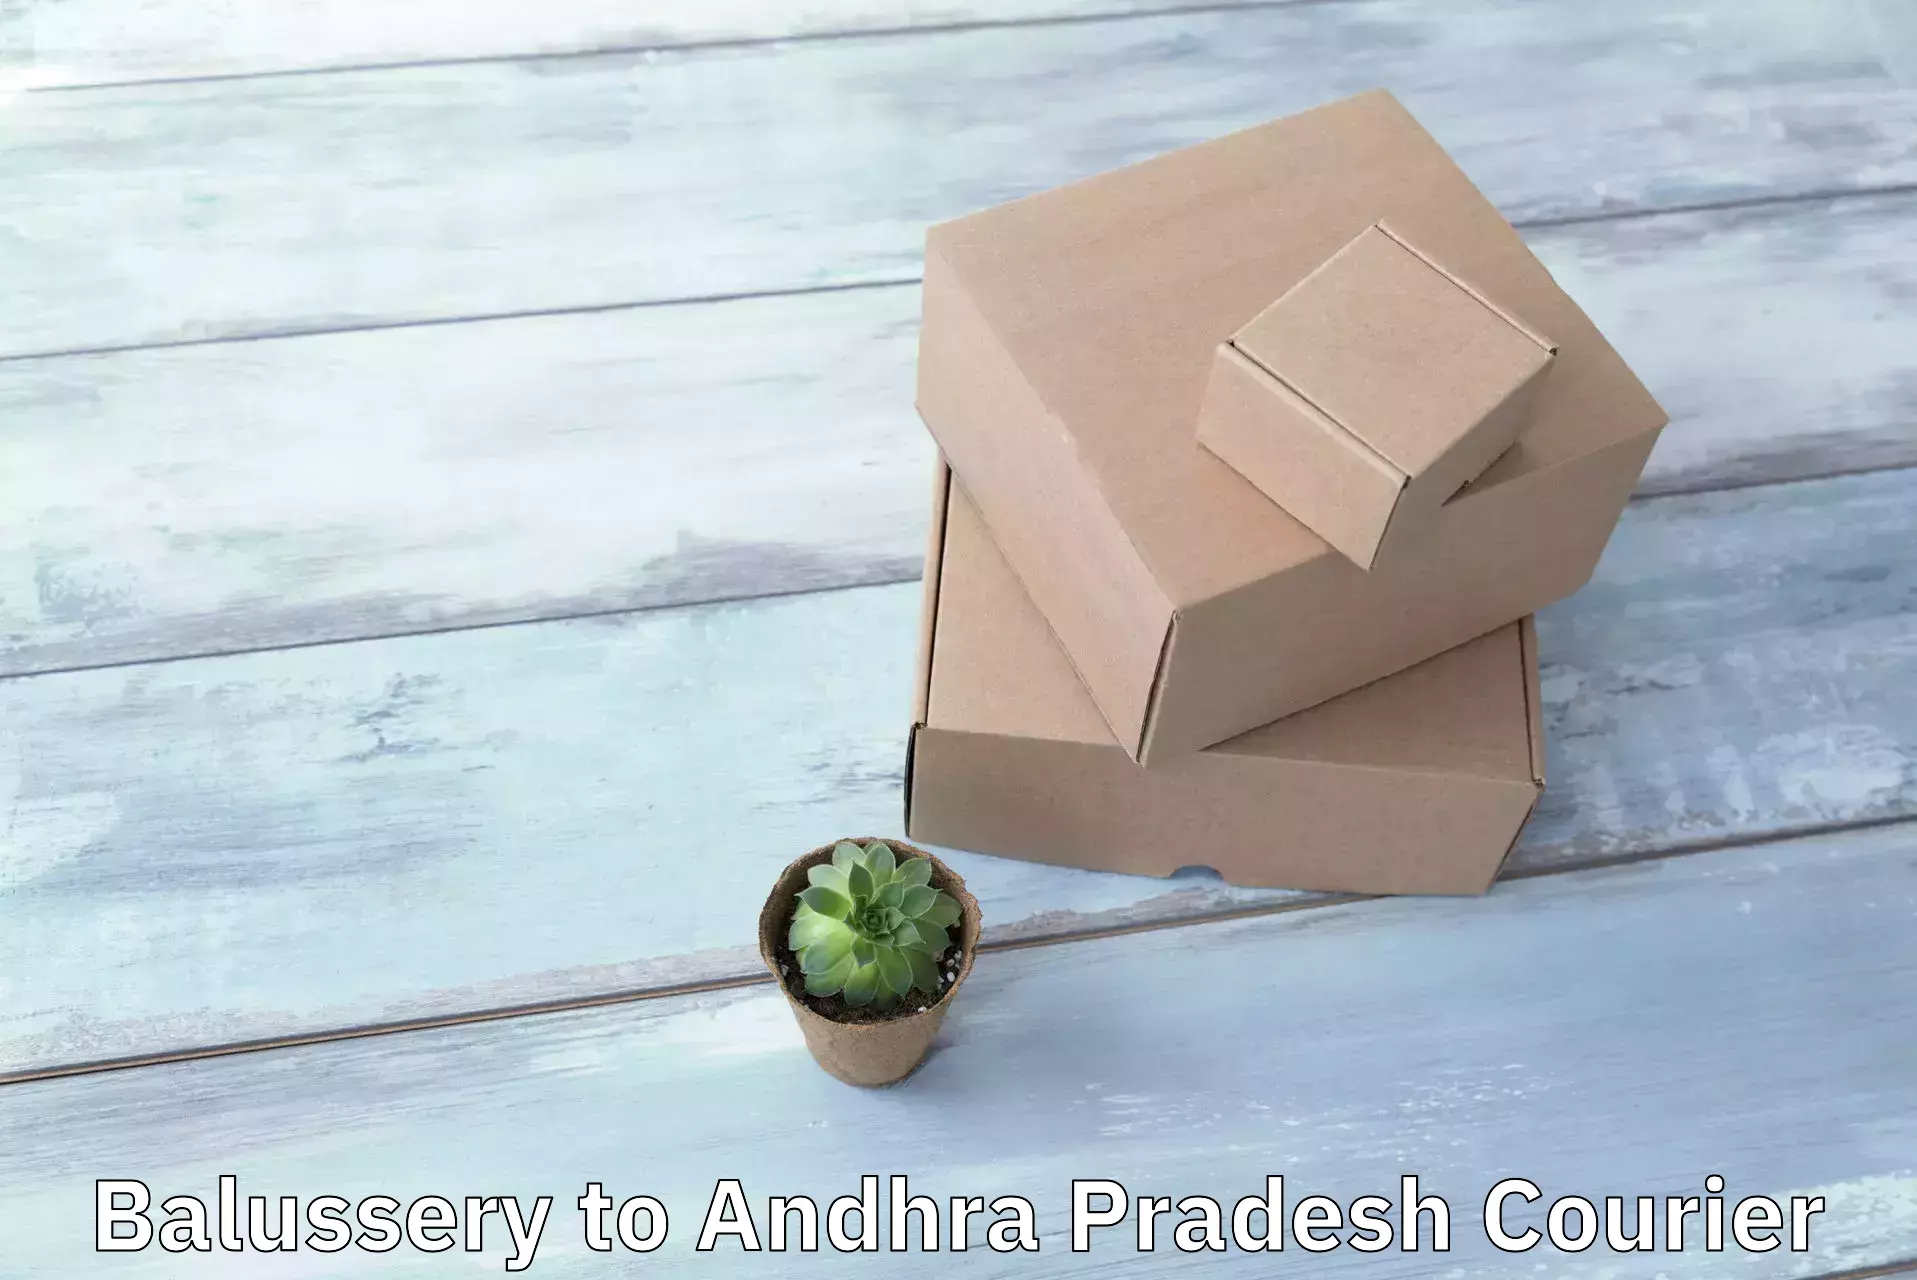 Courier service efficiency Balussery to Andhra Pradesh